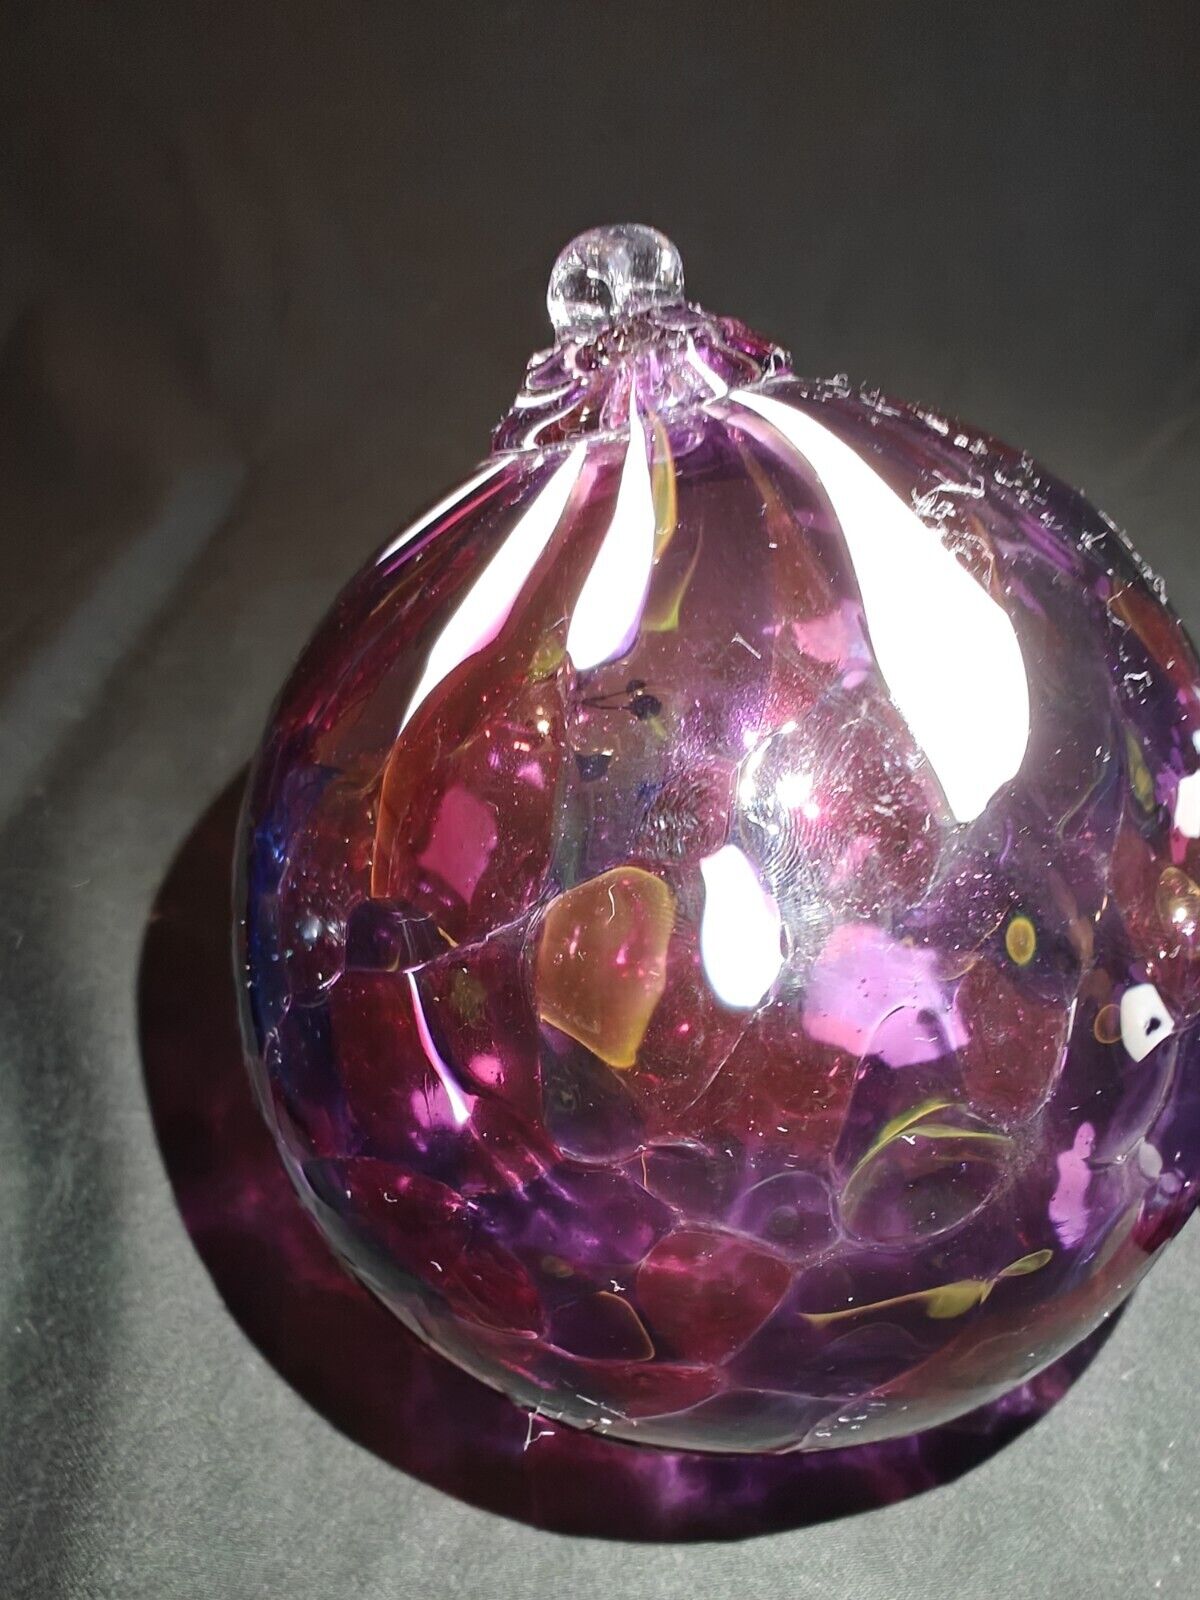 Hand Blown Glass Ornaments Balls Blue, Green, Purple, Red with White